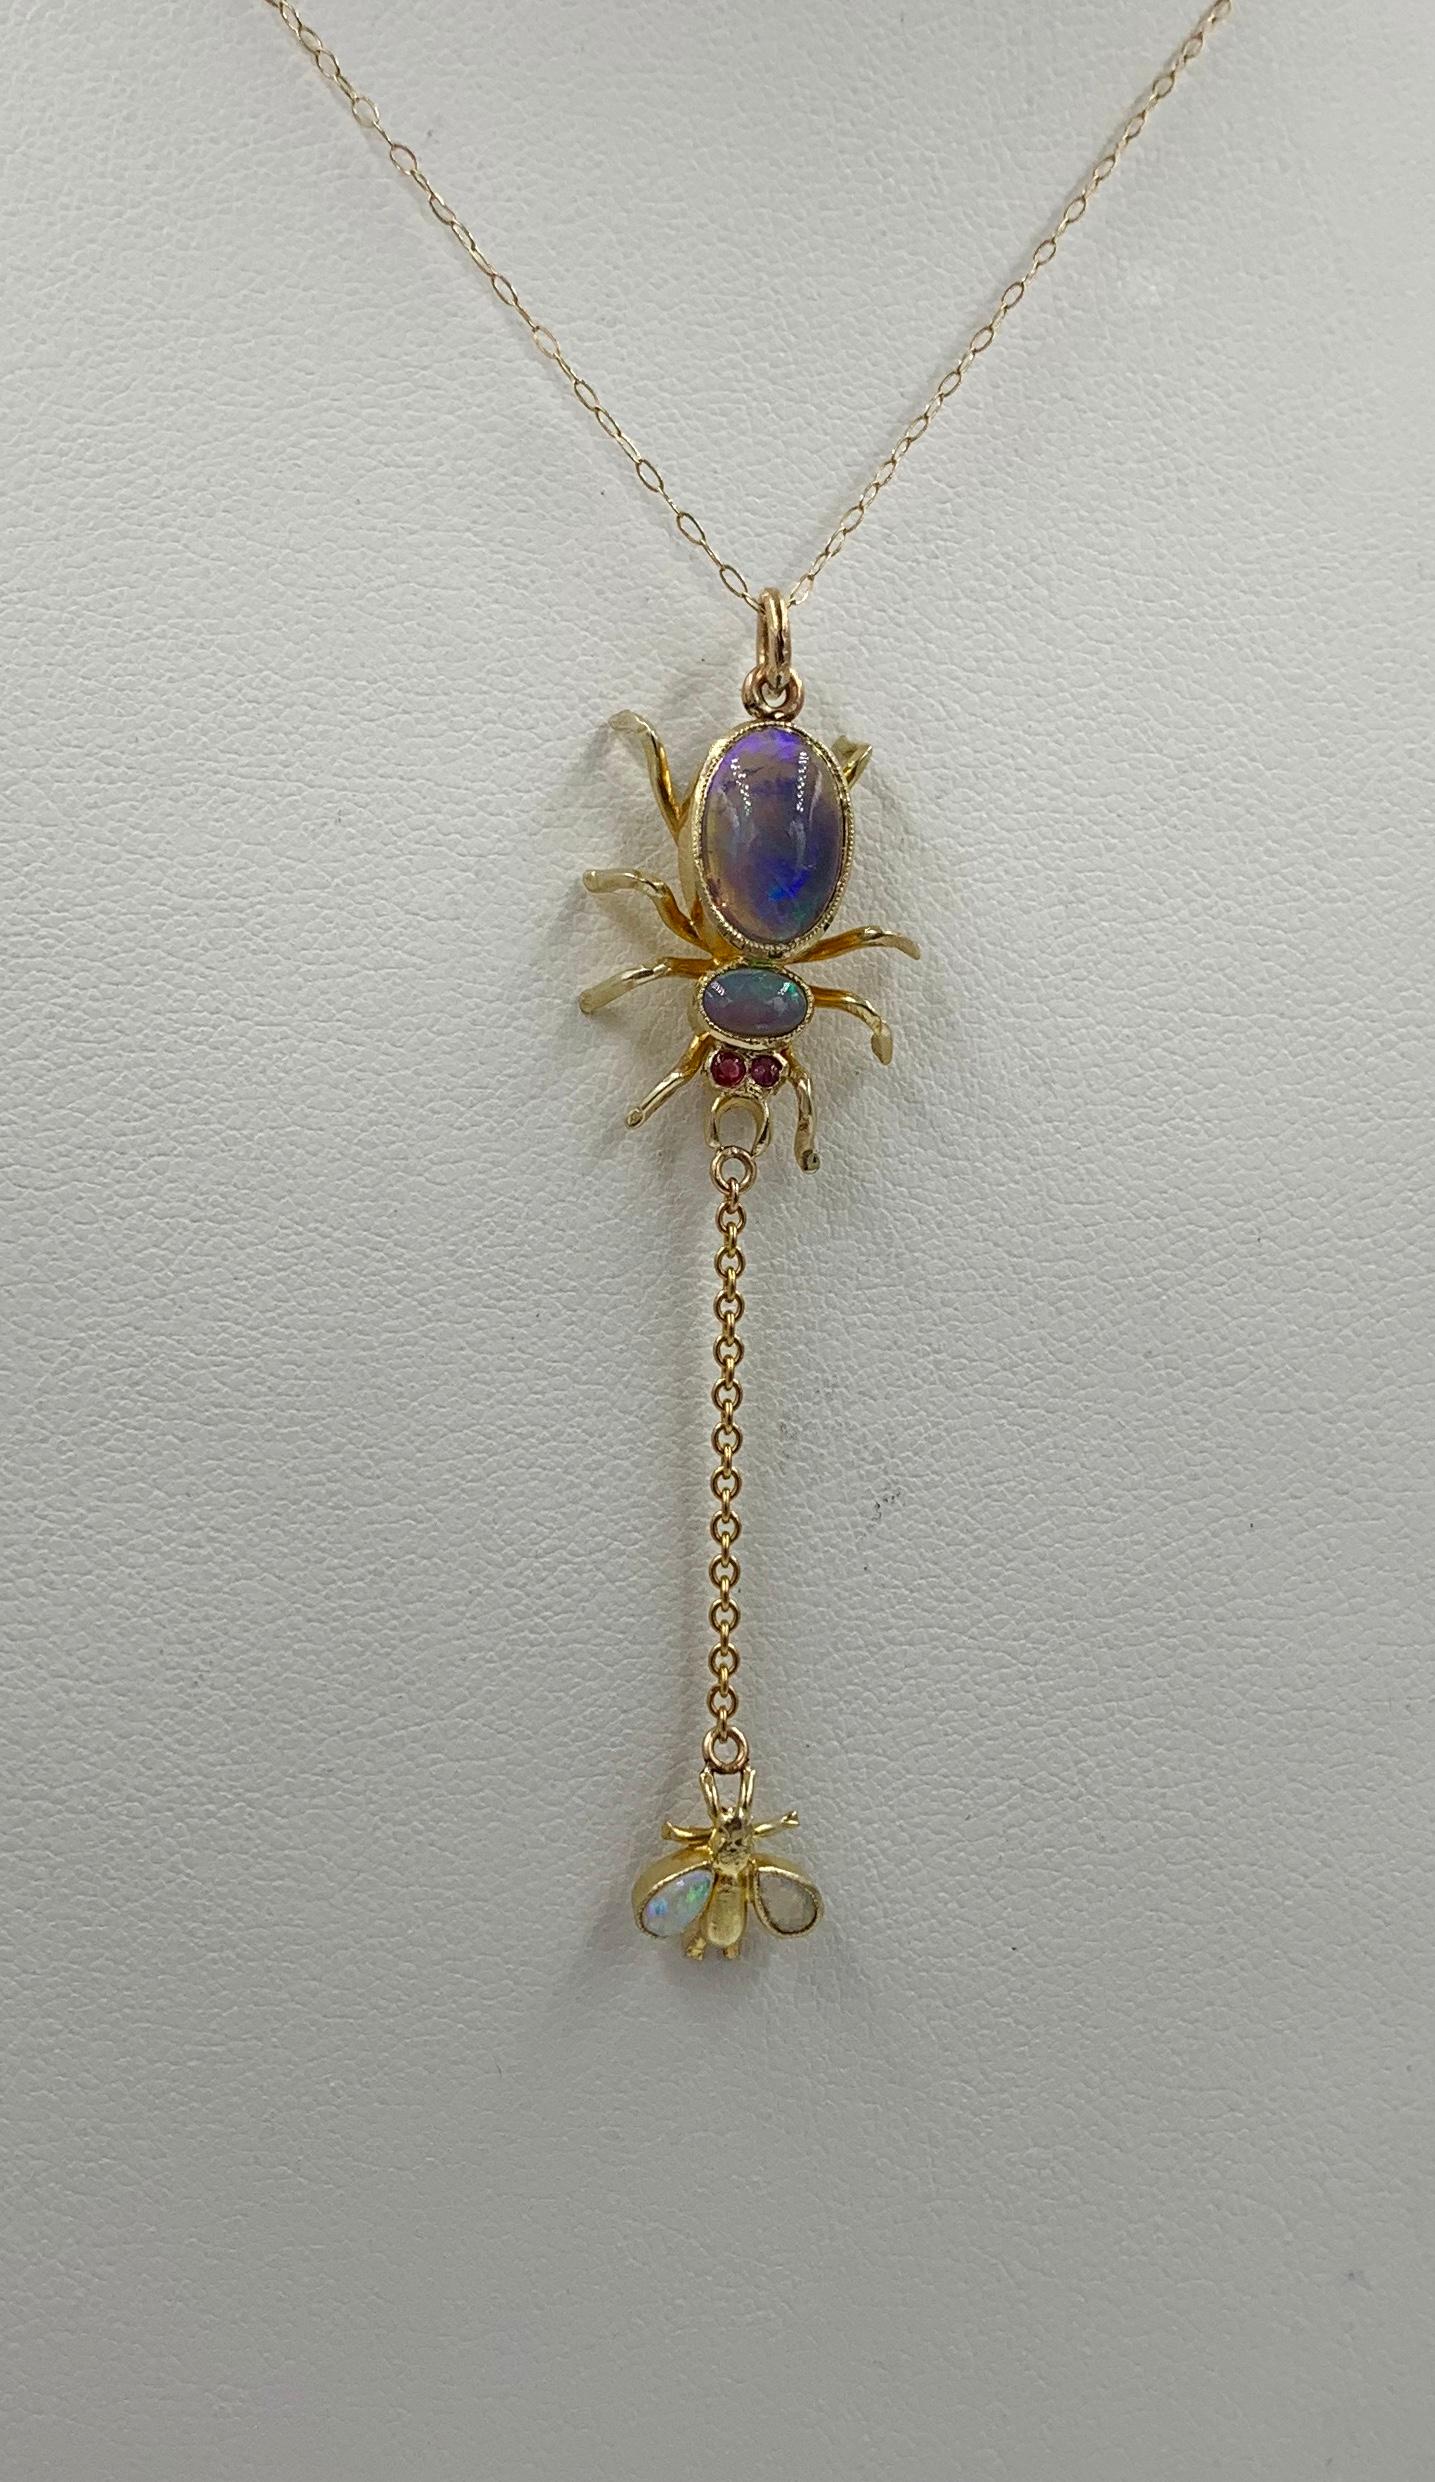 A stunning and rare antique Art Deco Spider and Fly Pendant set with gorgeous Opal gems and Ruby eyes in 10 Karat Gold.  The extraordinary pendant has the most fabulous Opals.  The spider is set with two oval opal gems in the body and with two round